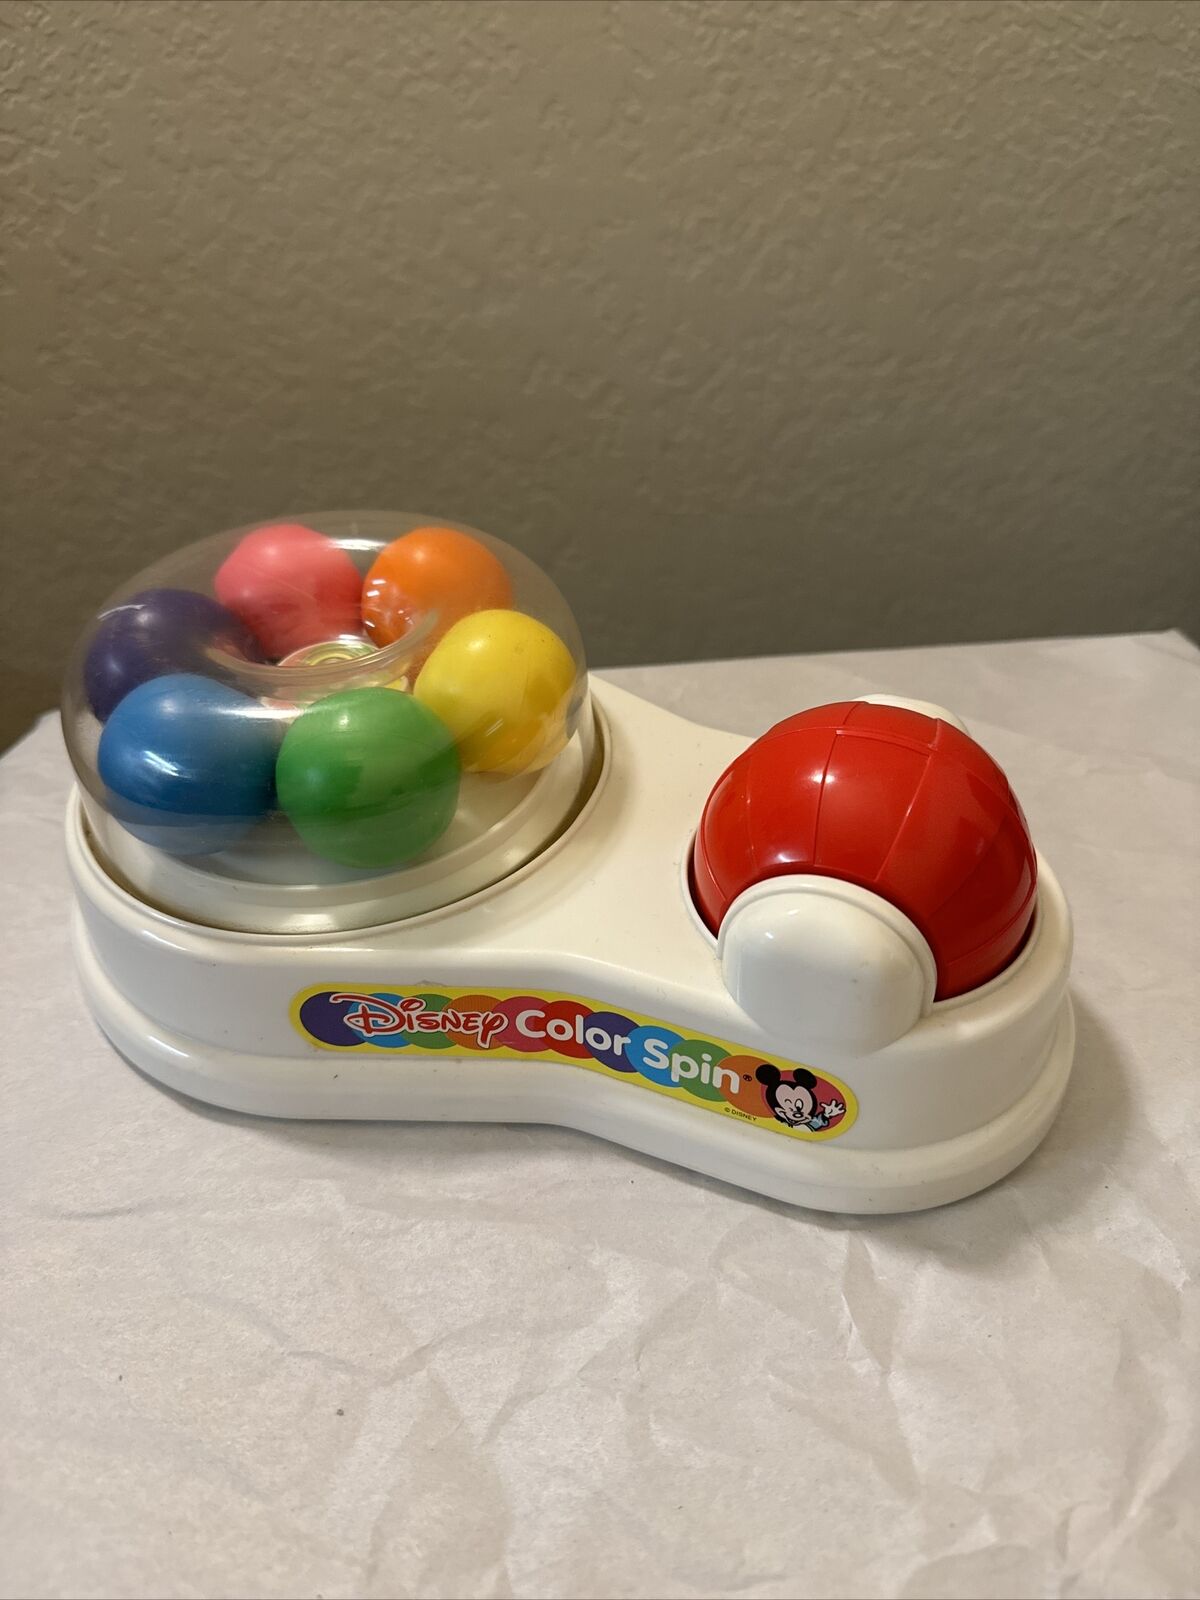 Vintage 1986 Disney Color Spin Mickey Mouse Mutli Colored Balls Toy Mattel Works